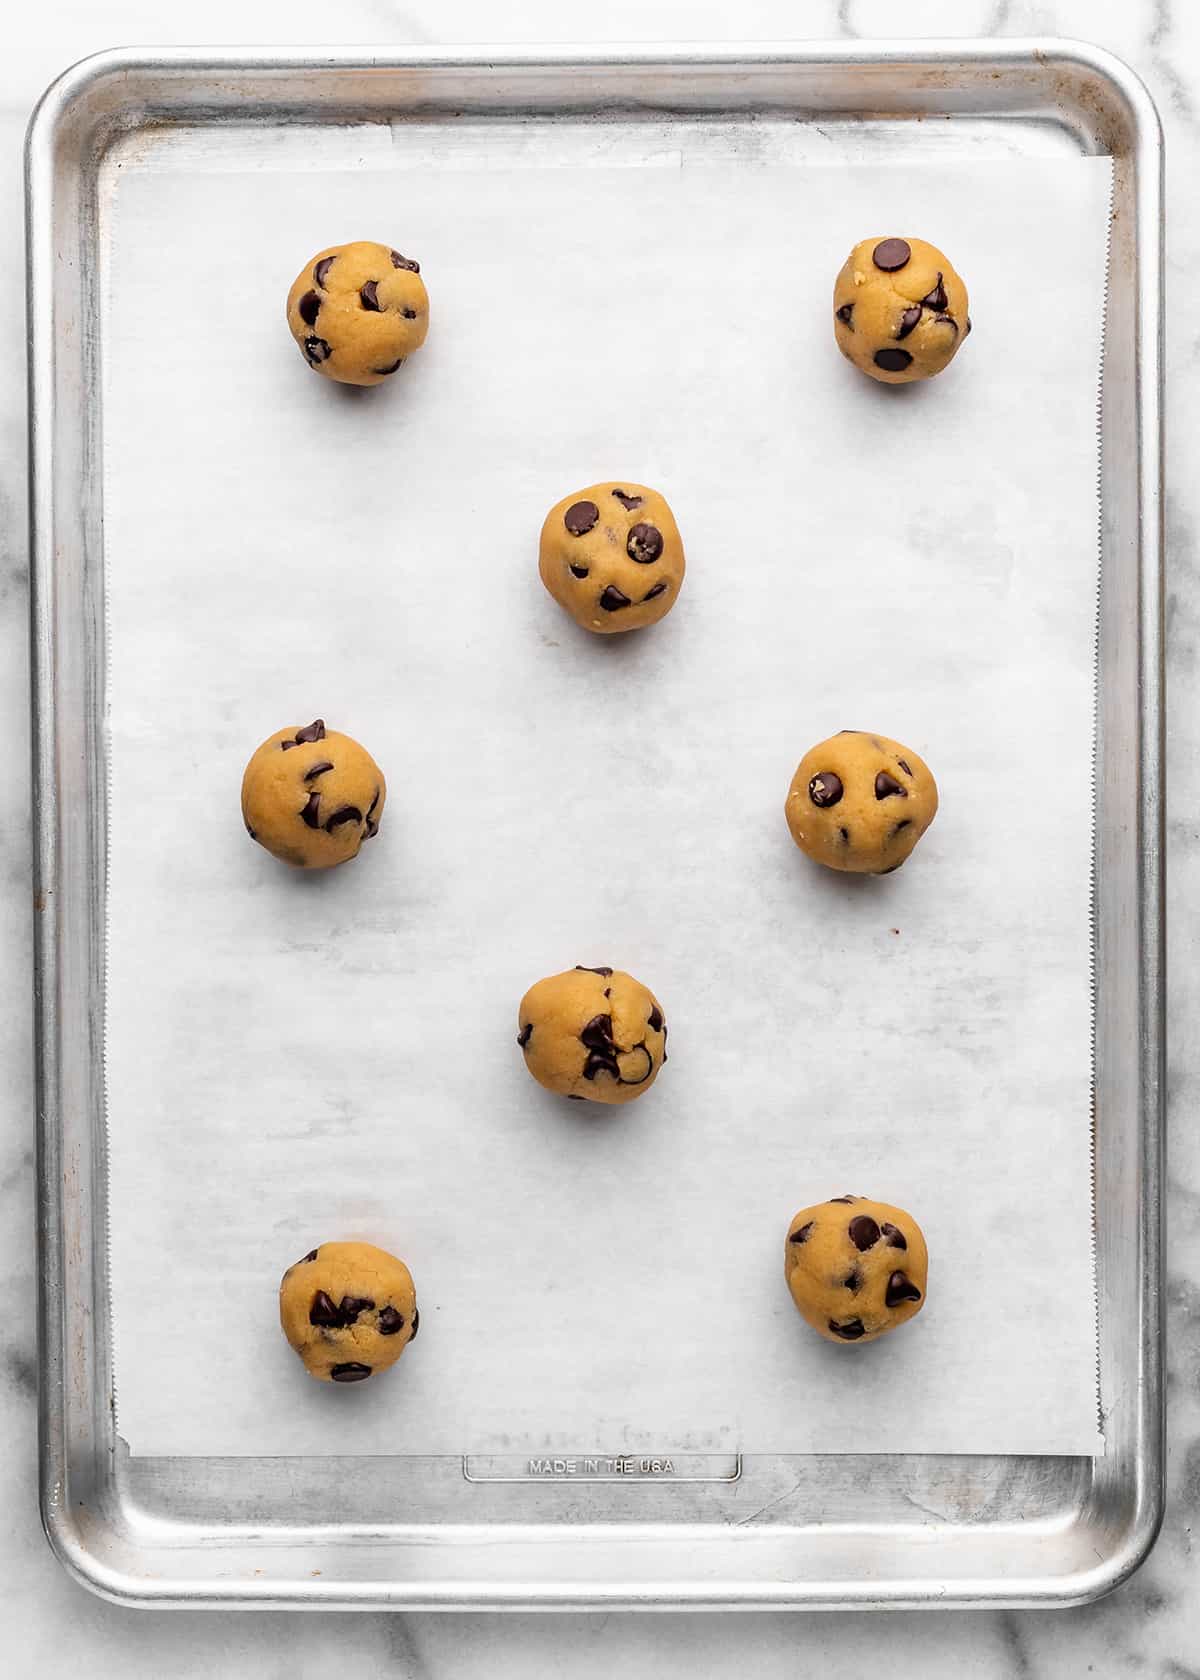 Small Batch Chocolate Chip Cookies dough on a baking sheet before baking